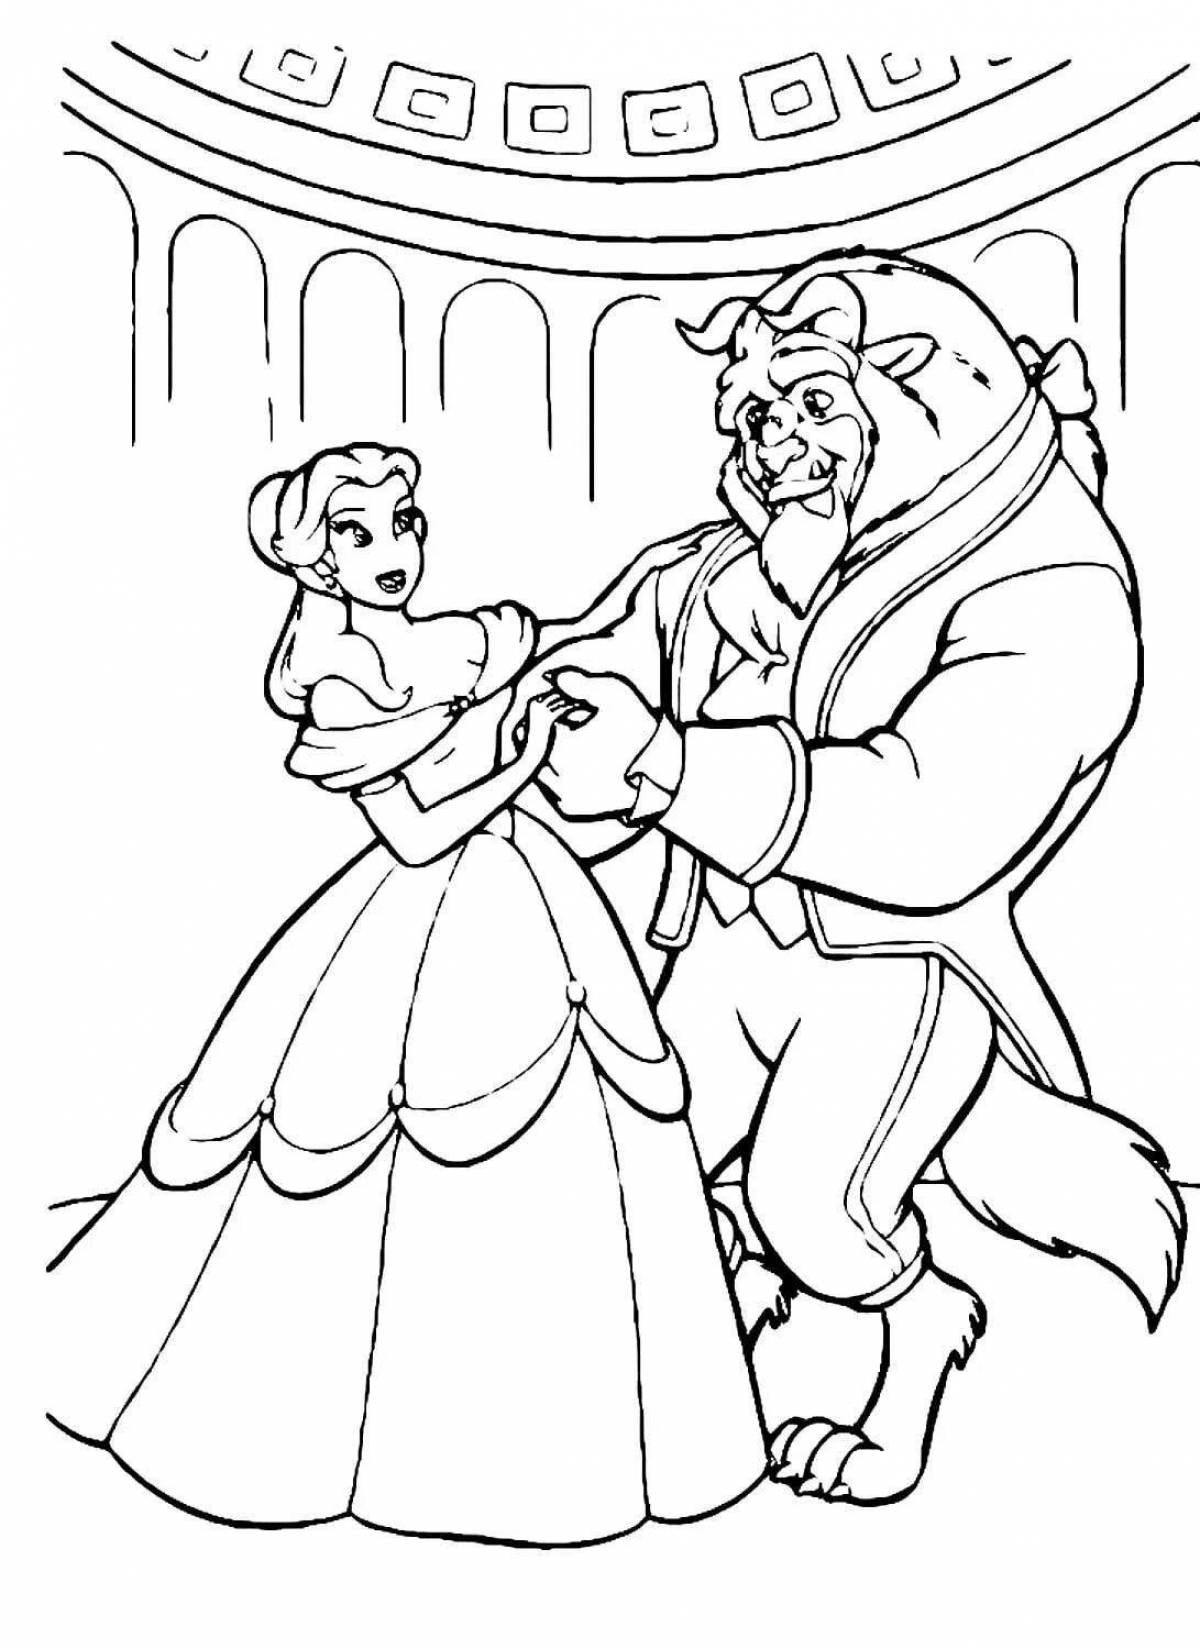 Magic beauty and the beast coloring pages for kids